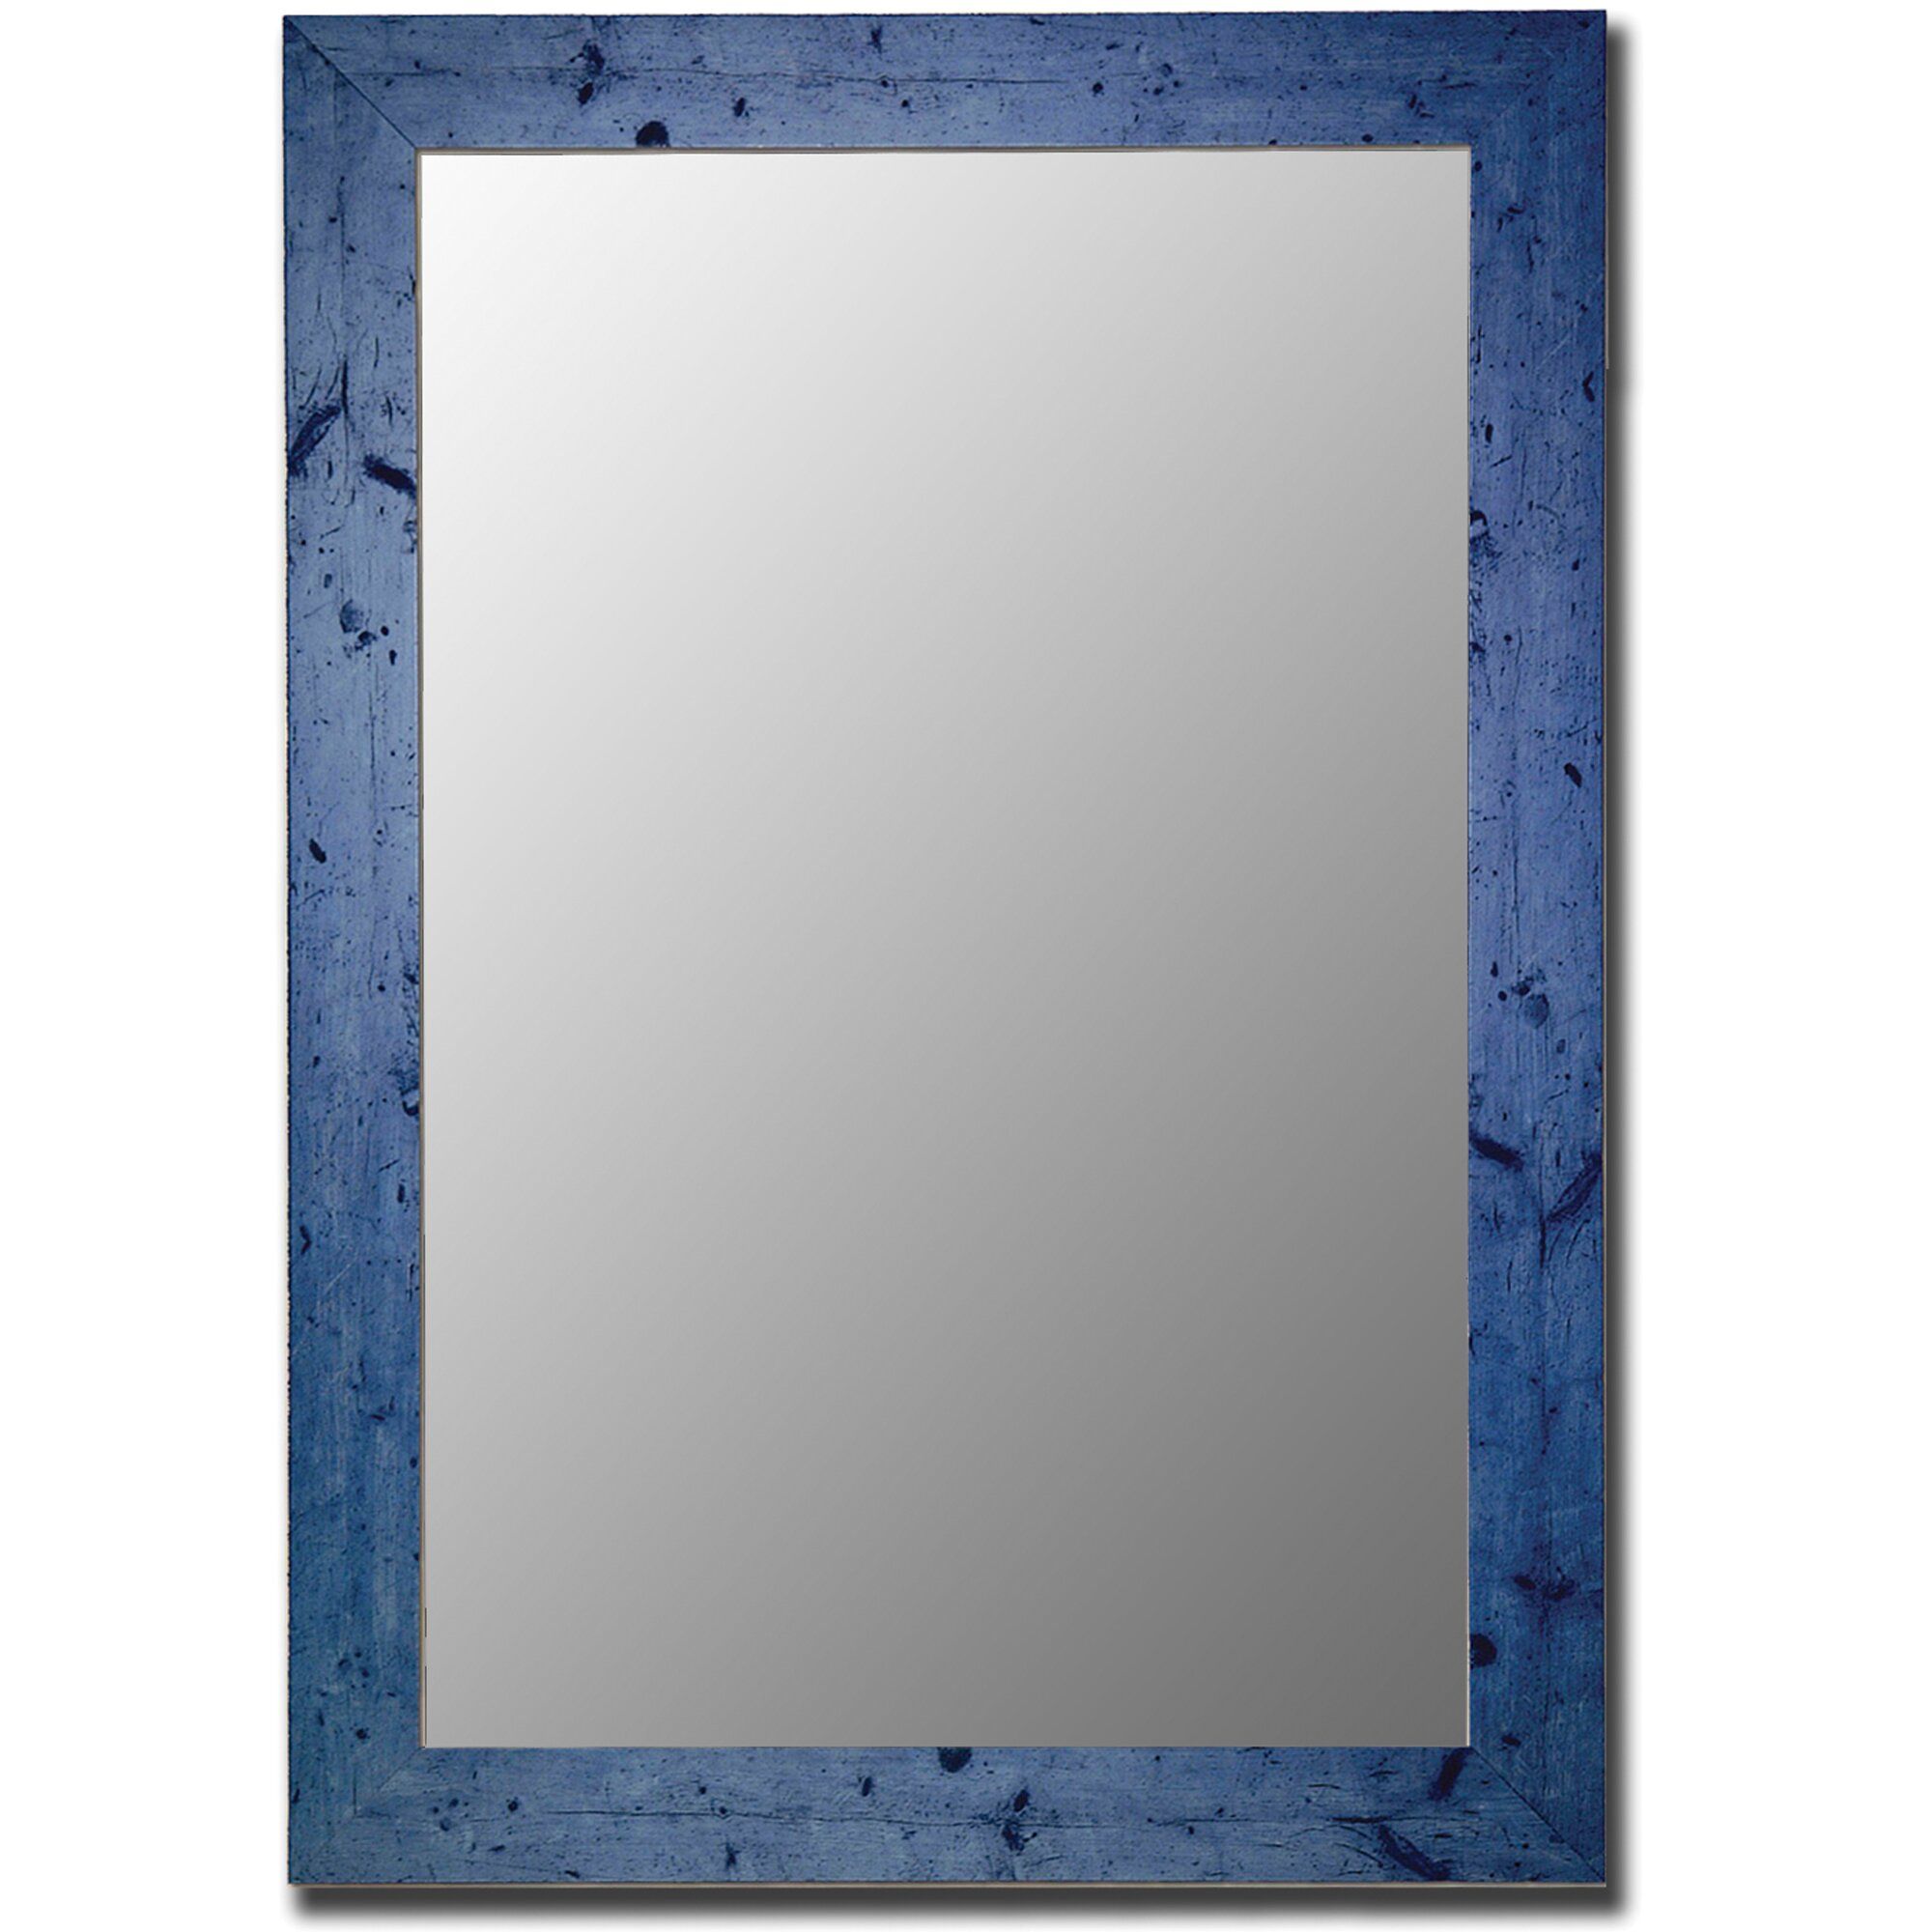 Hitchcock Butterfield Company Vintage Barnwood Blue Wall Mirror Regarding Blue Wall Mirrors (View 14 of 15)